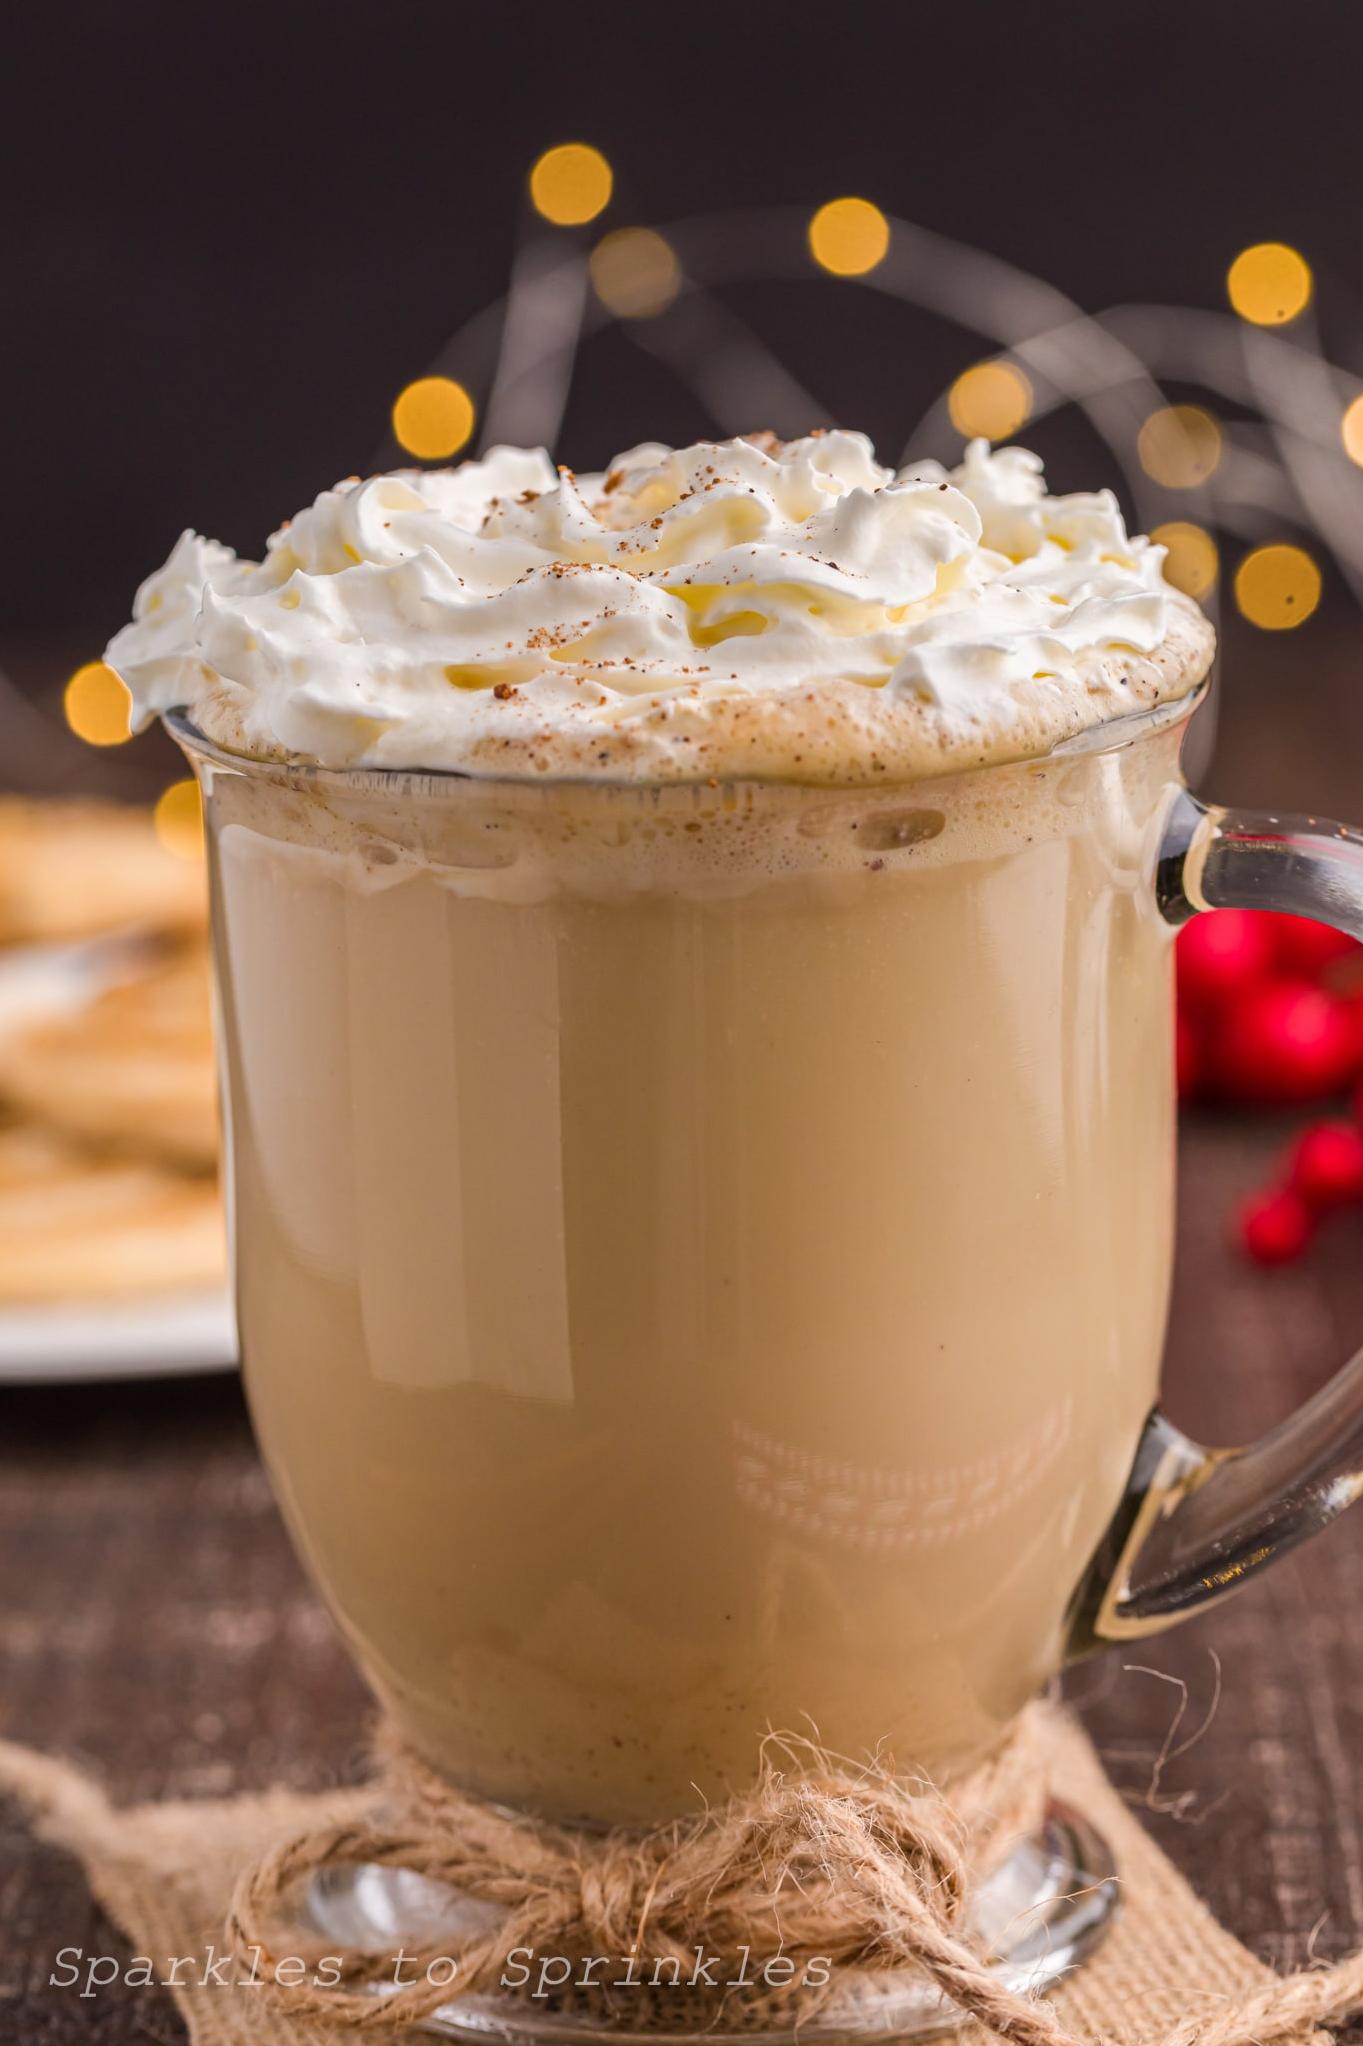  One sip of this coffee creation, and the holiday cheer will be flowing in your veins.